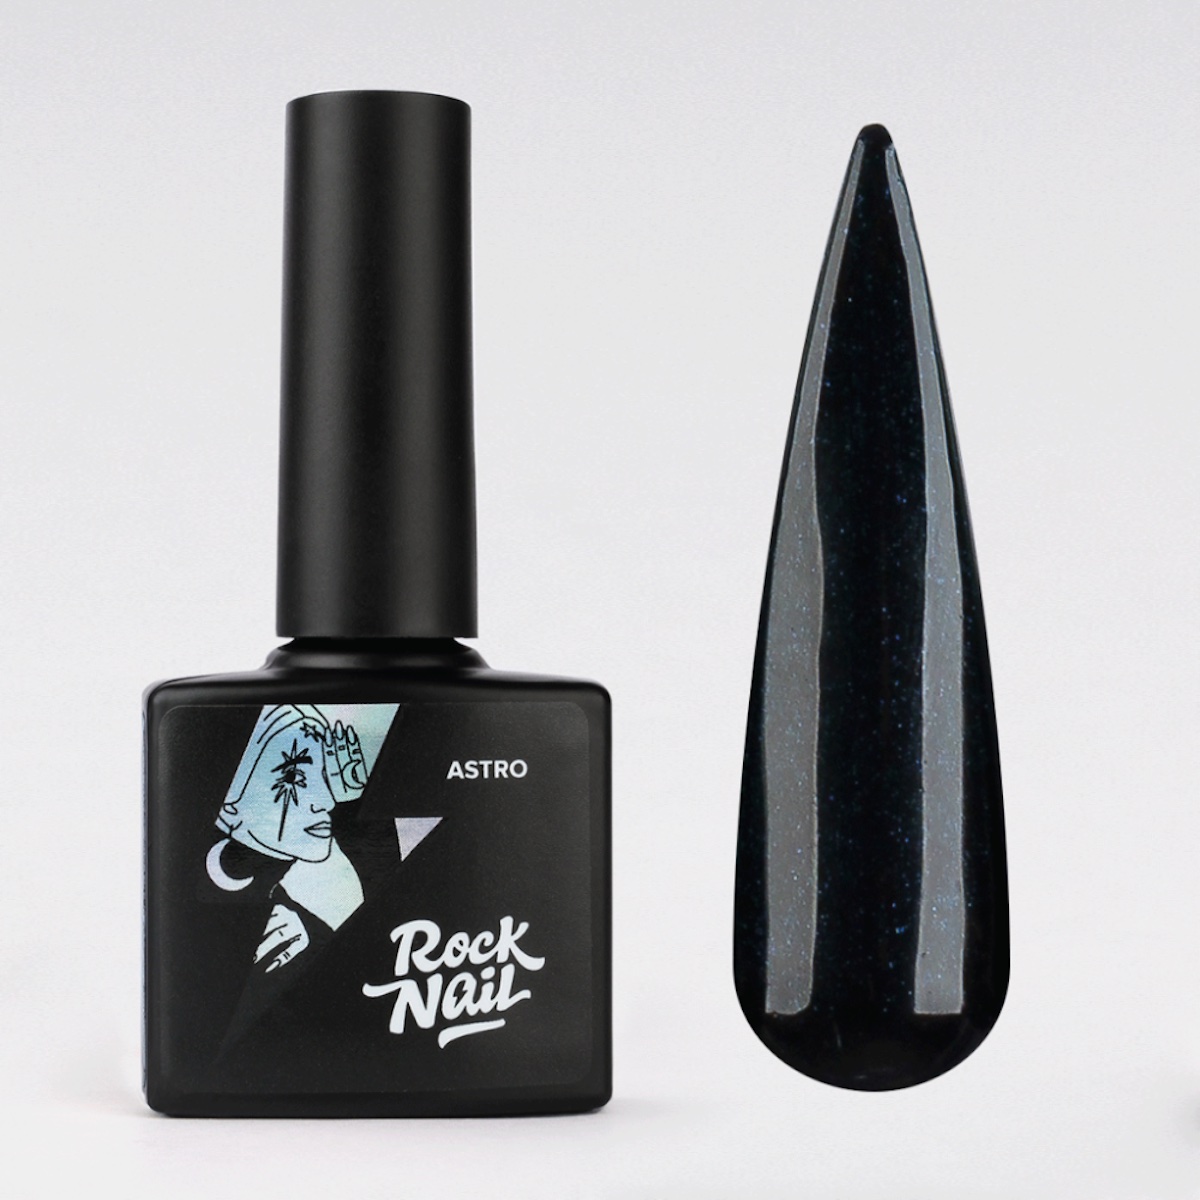 Rock Nail Astro 326 Karma is a Witch